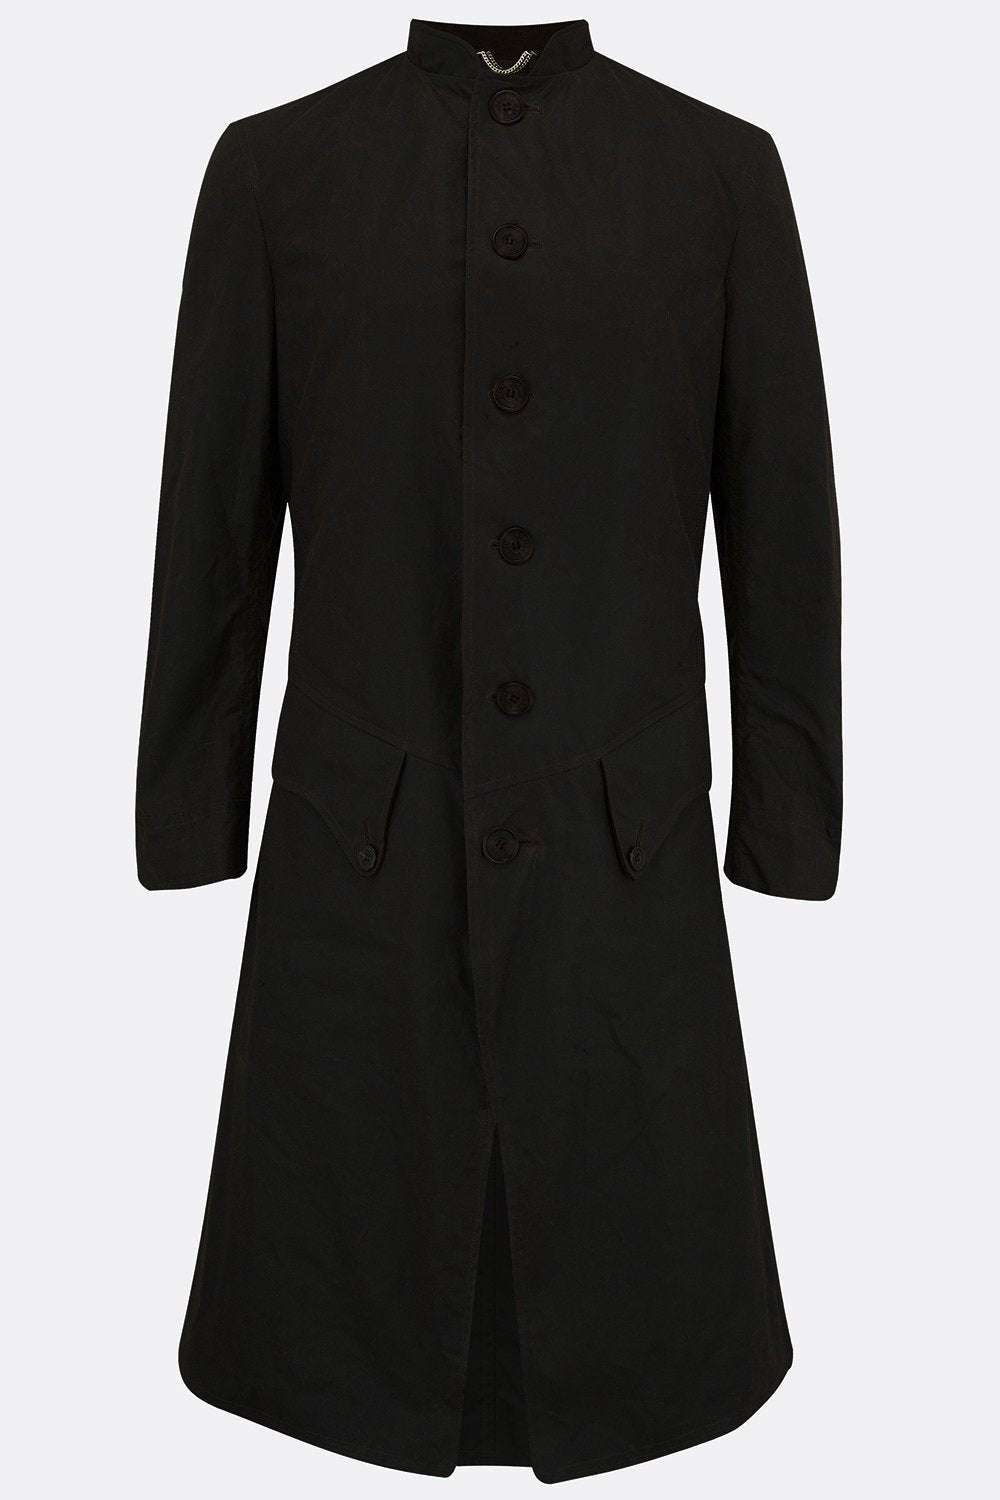 TEACH COAT IN BLACK WAXED COTTON-menswear-A Child Of The Jago